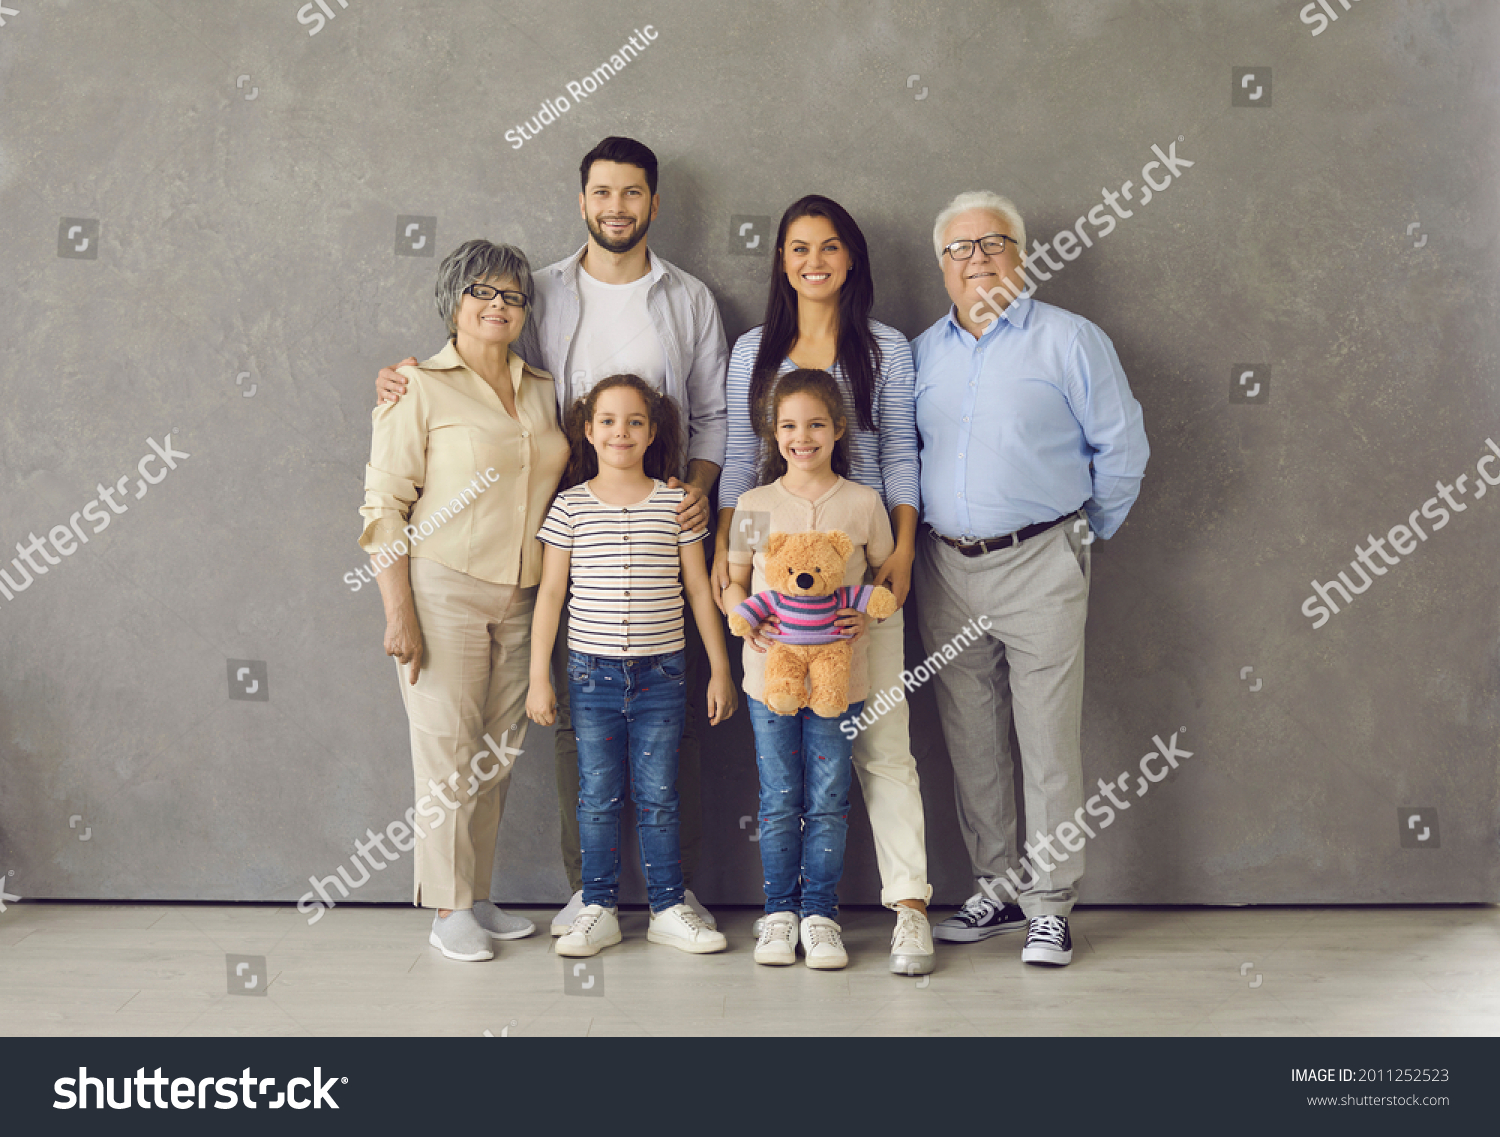 Studio photoshoot group portrait of happy big extended multi generational family. Cheerful mom, dad, grandma, grandpa and two little daughters with toy standing together, looking at camera and smiling #2011252523